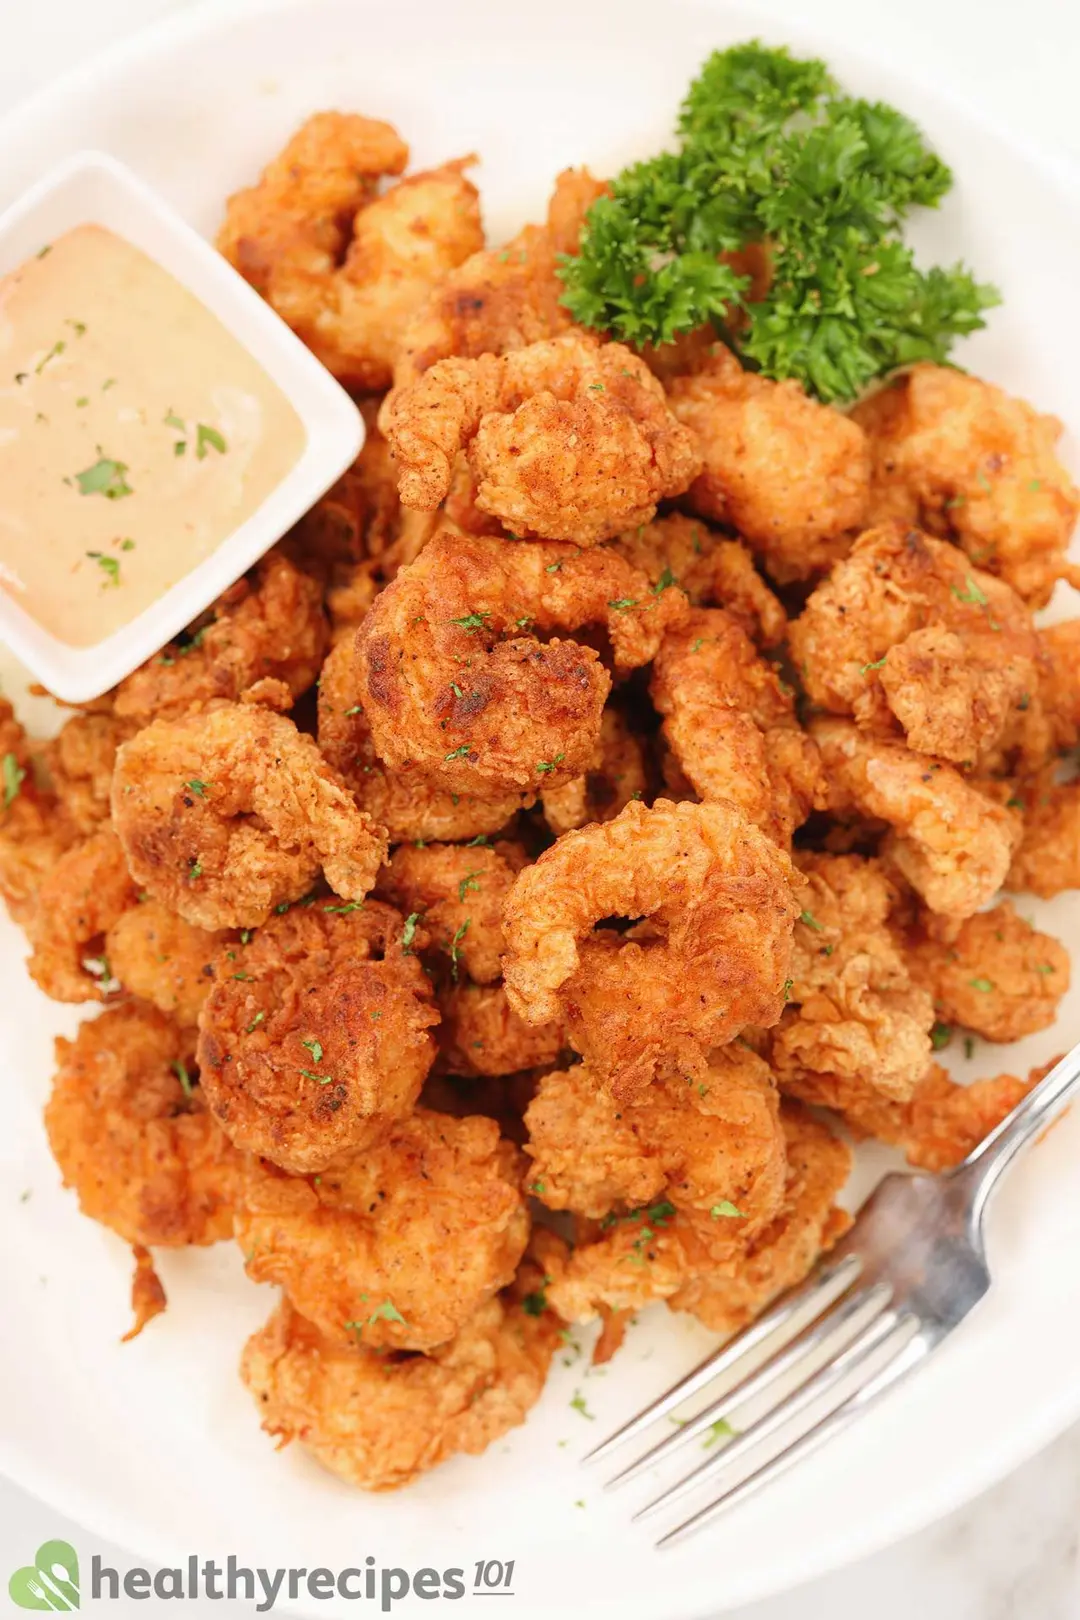 What to Serve With Popcorn Shrimp